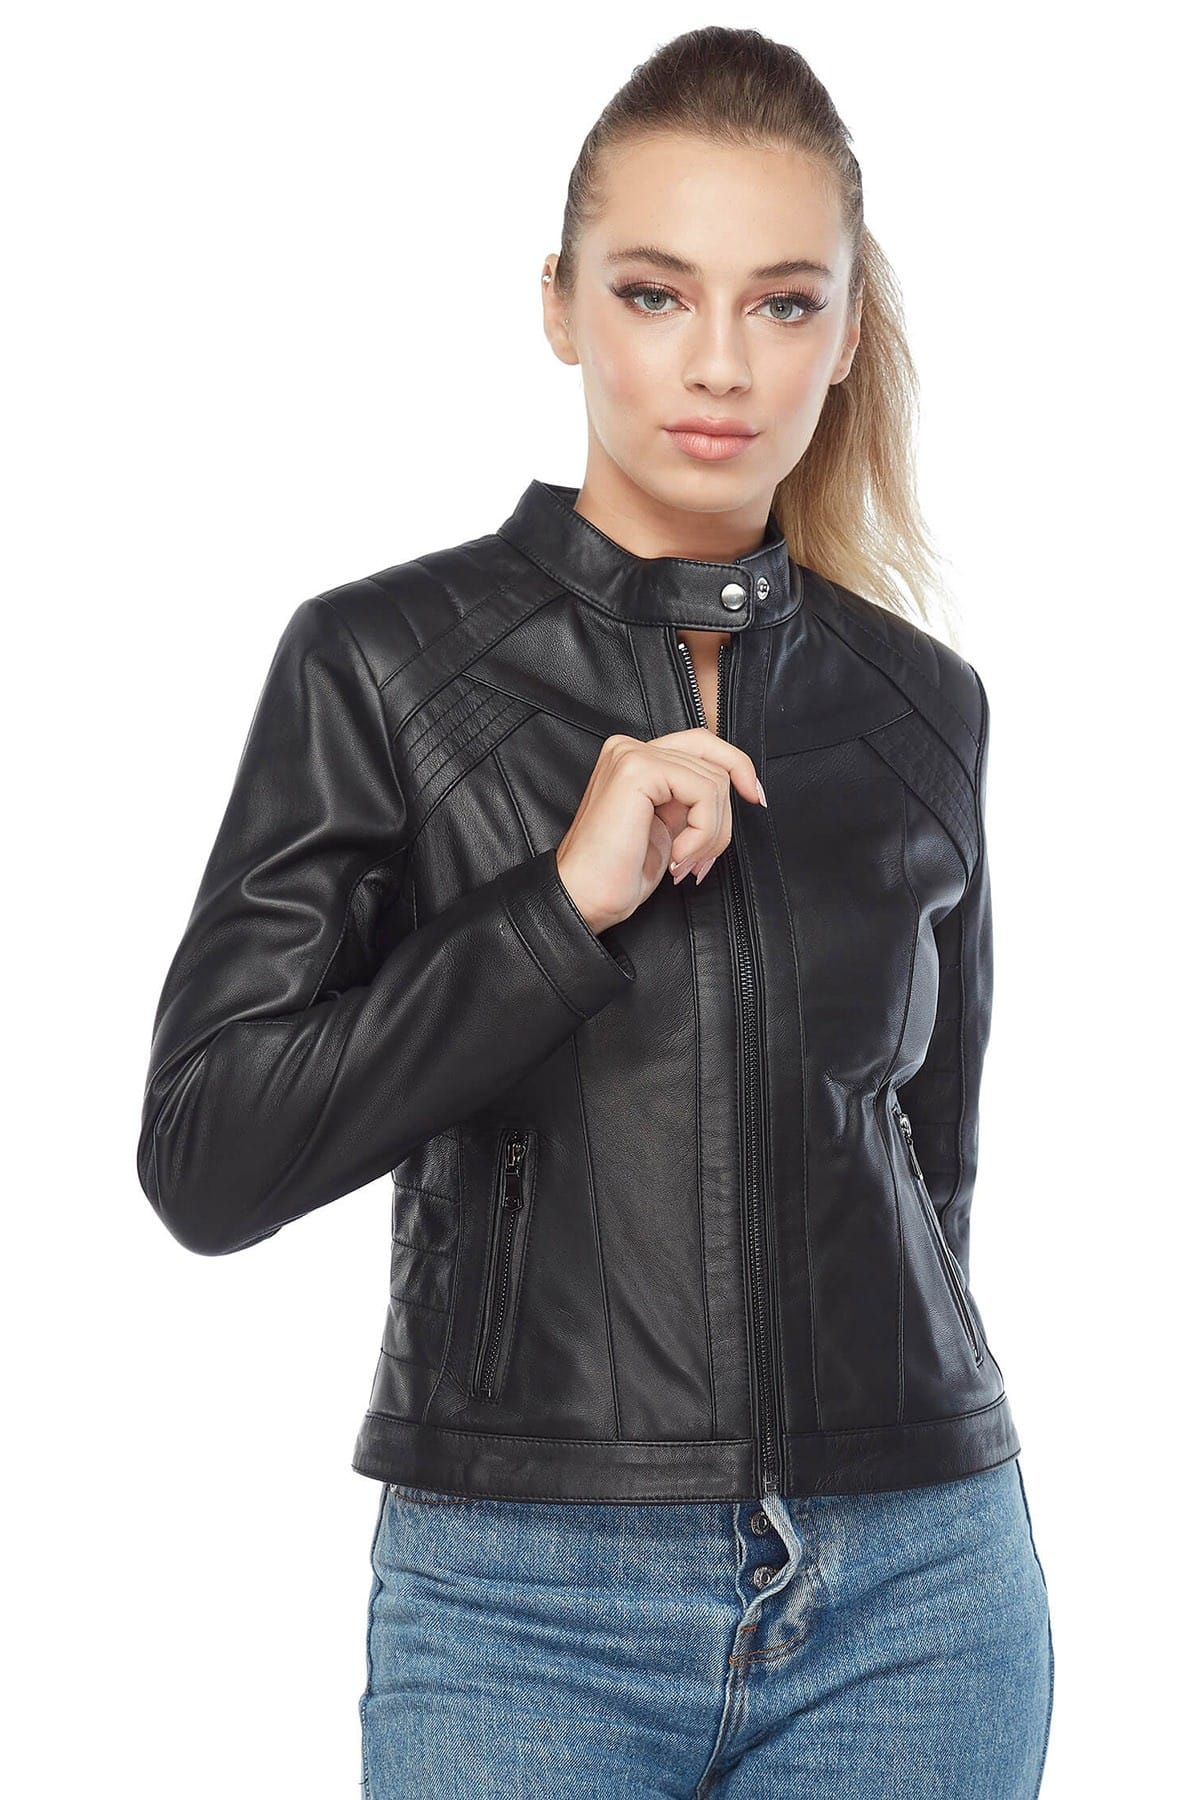 Rosa Women's 100 % Real Black Leather Jacket